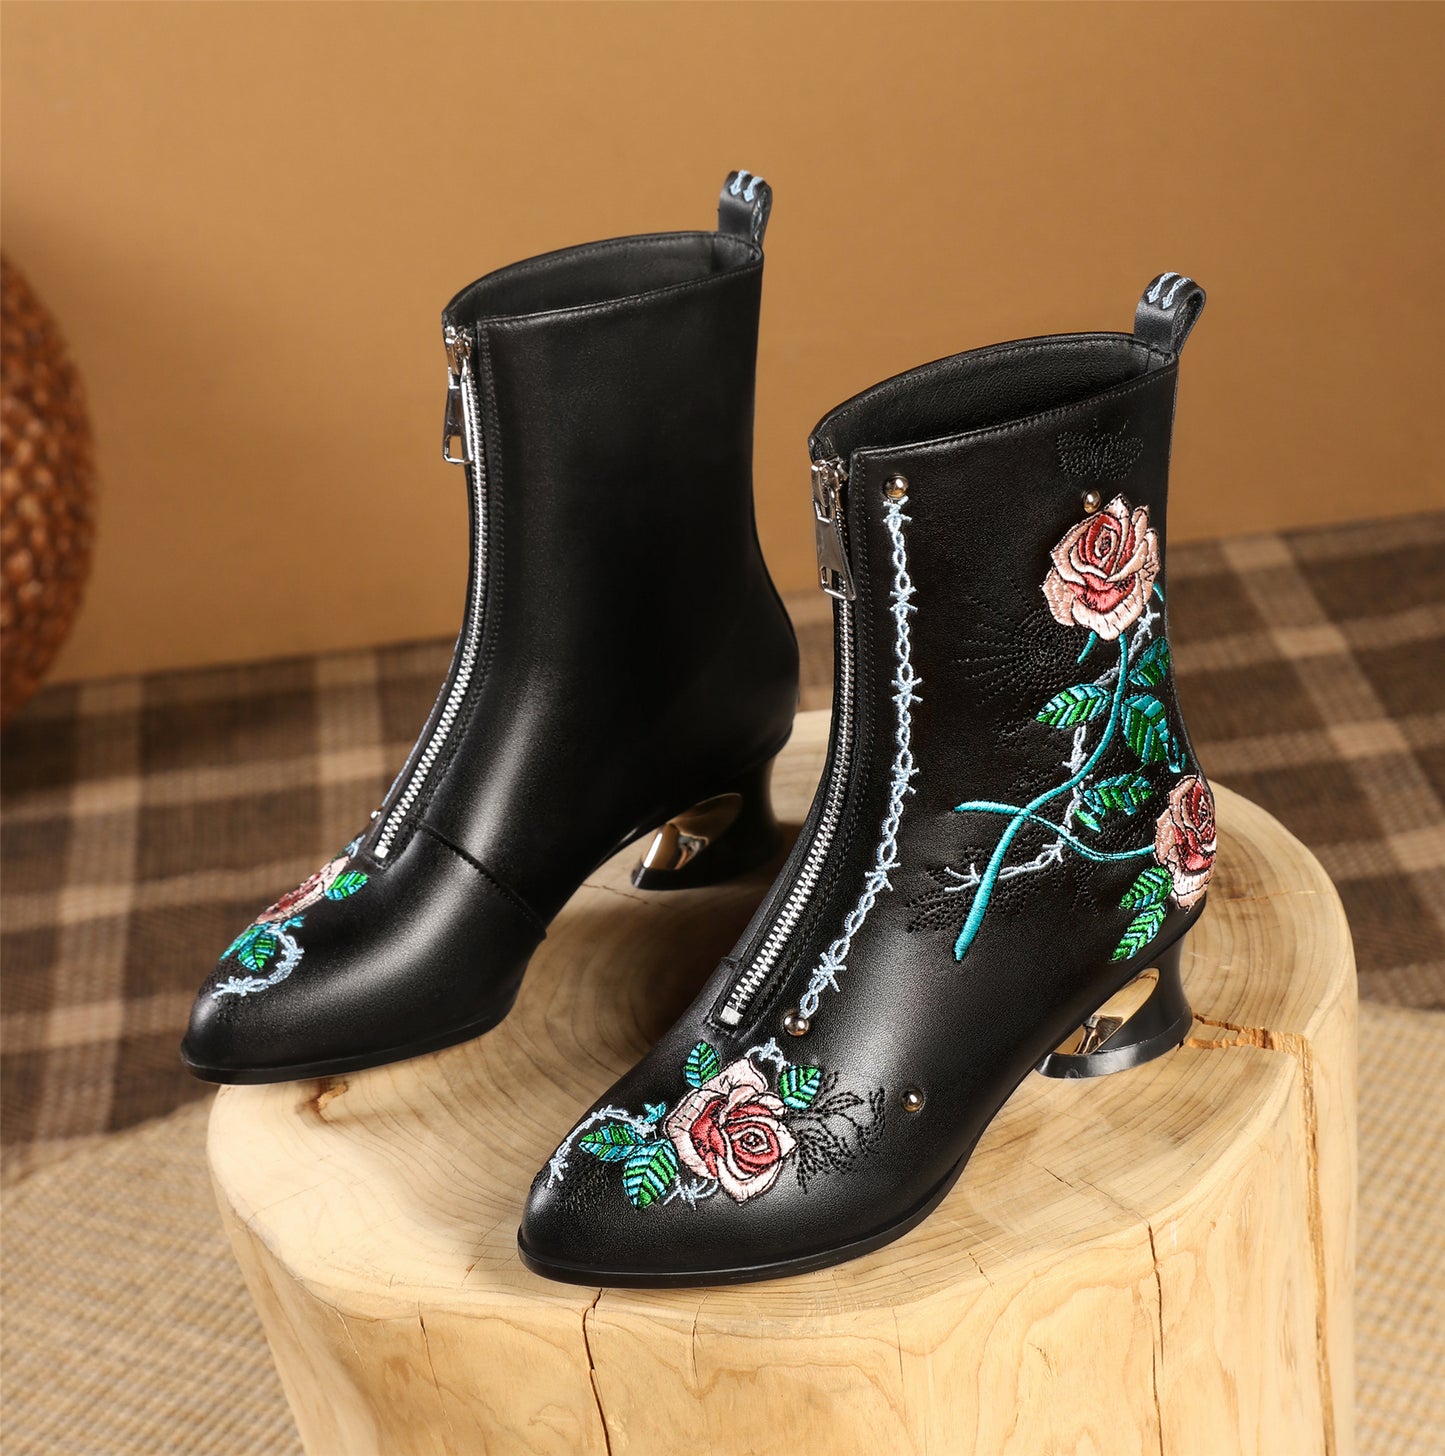 TinaCus Handmade Women's Genuine Leather Ethnic Embroidered Floral Pointed Toe Low Chunky Heel Front Zipper Mid-Calf Boots